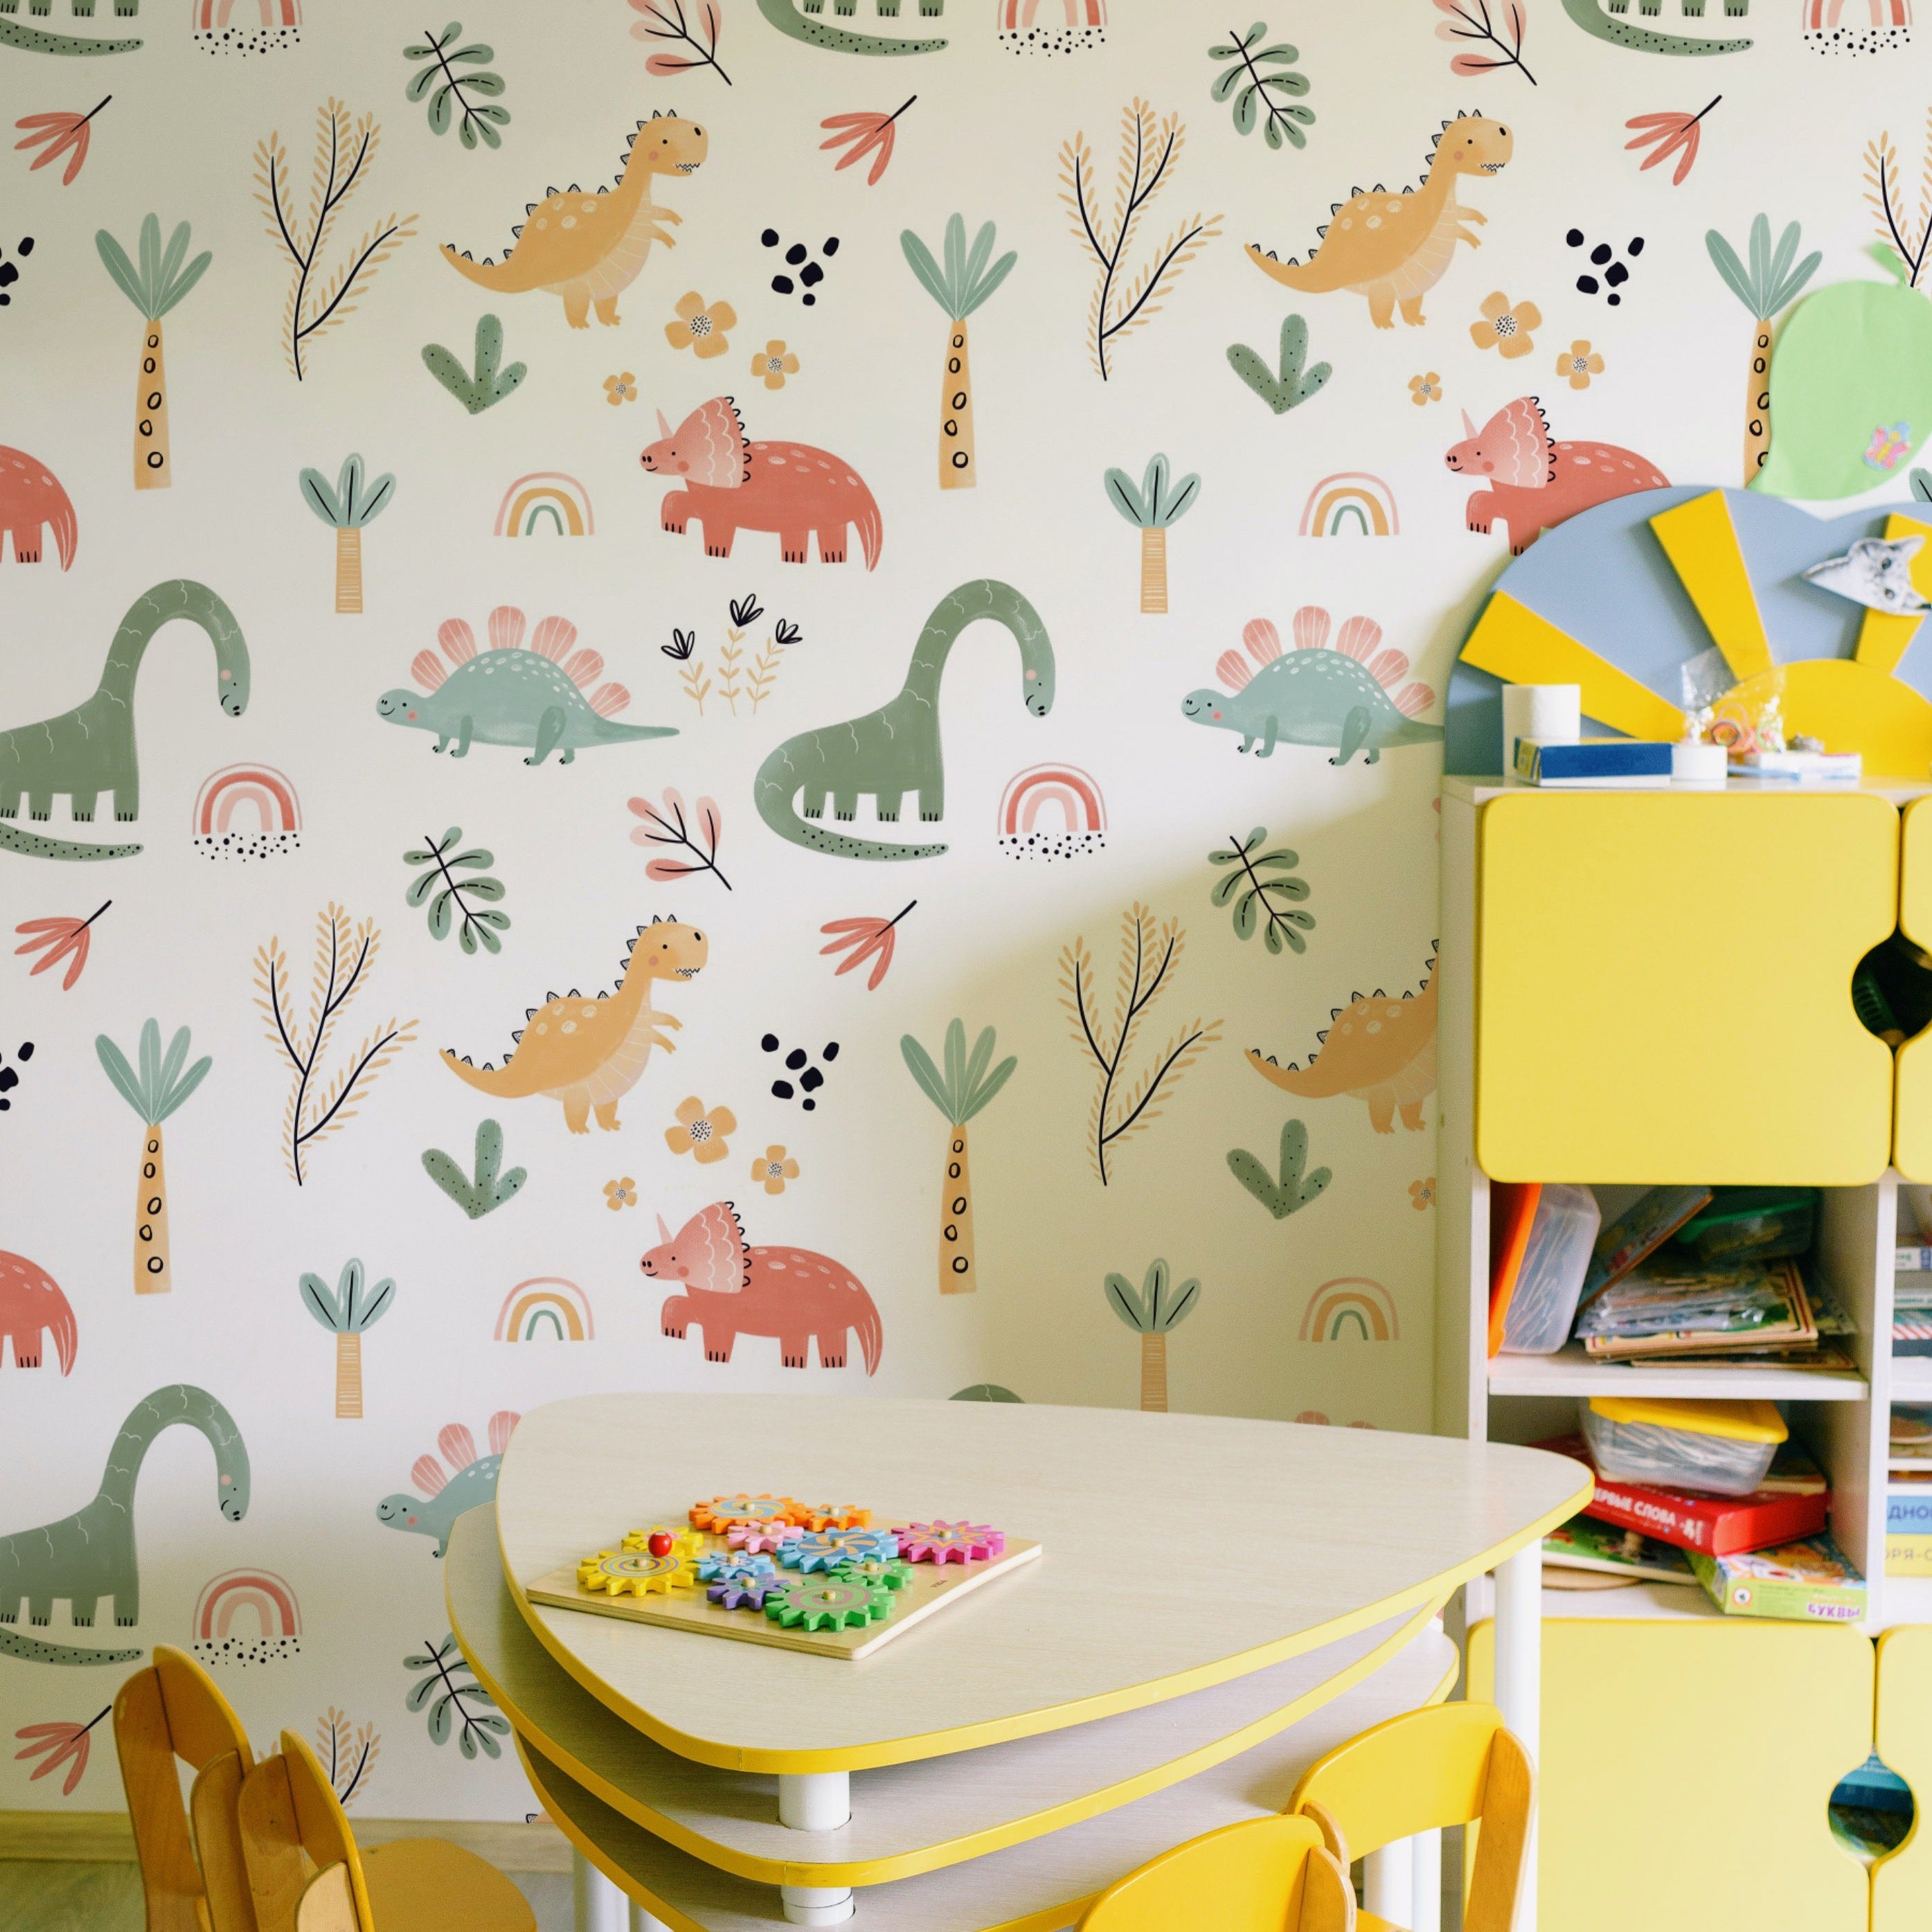 A playful and colorful children's play area featuring Dinosaur Nursery Wallpaper, with charming illustrations of friendly dinosaurs and flora in pastel colors, paired with a yellow and white children's table and chairs, creating a whimsical space for creativity and play.